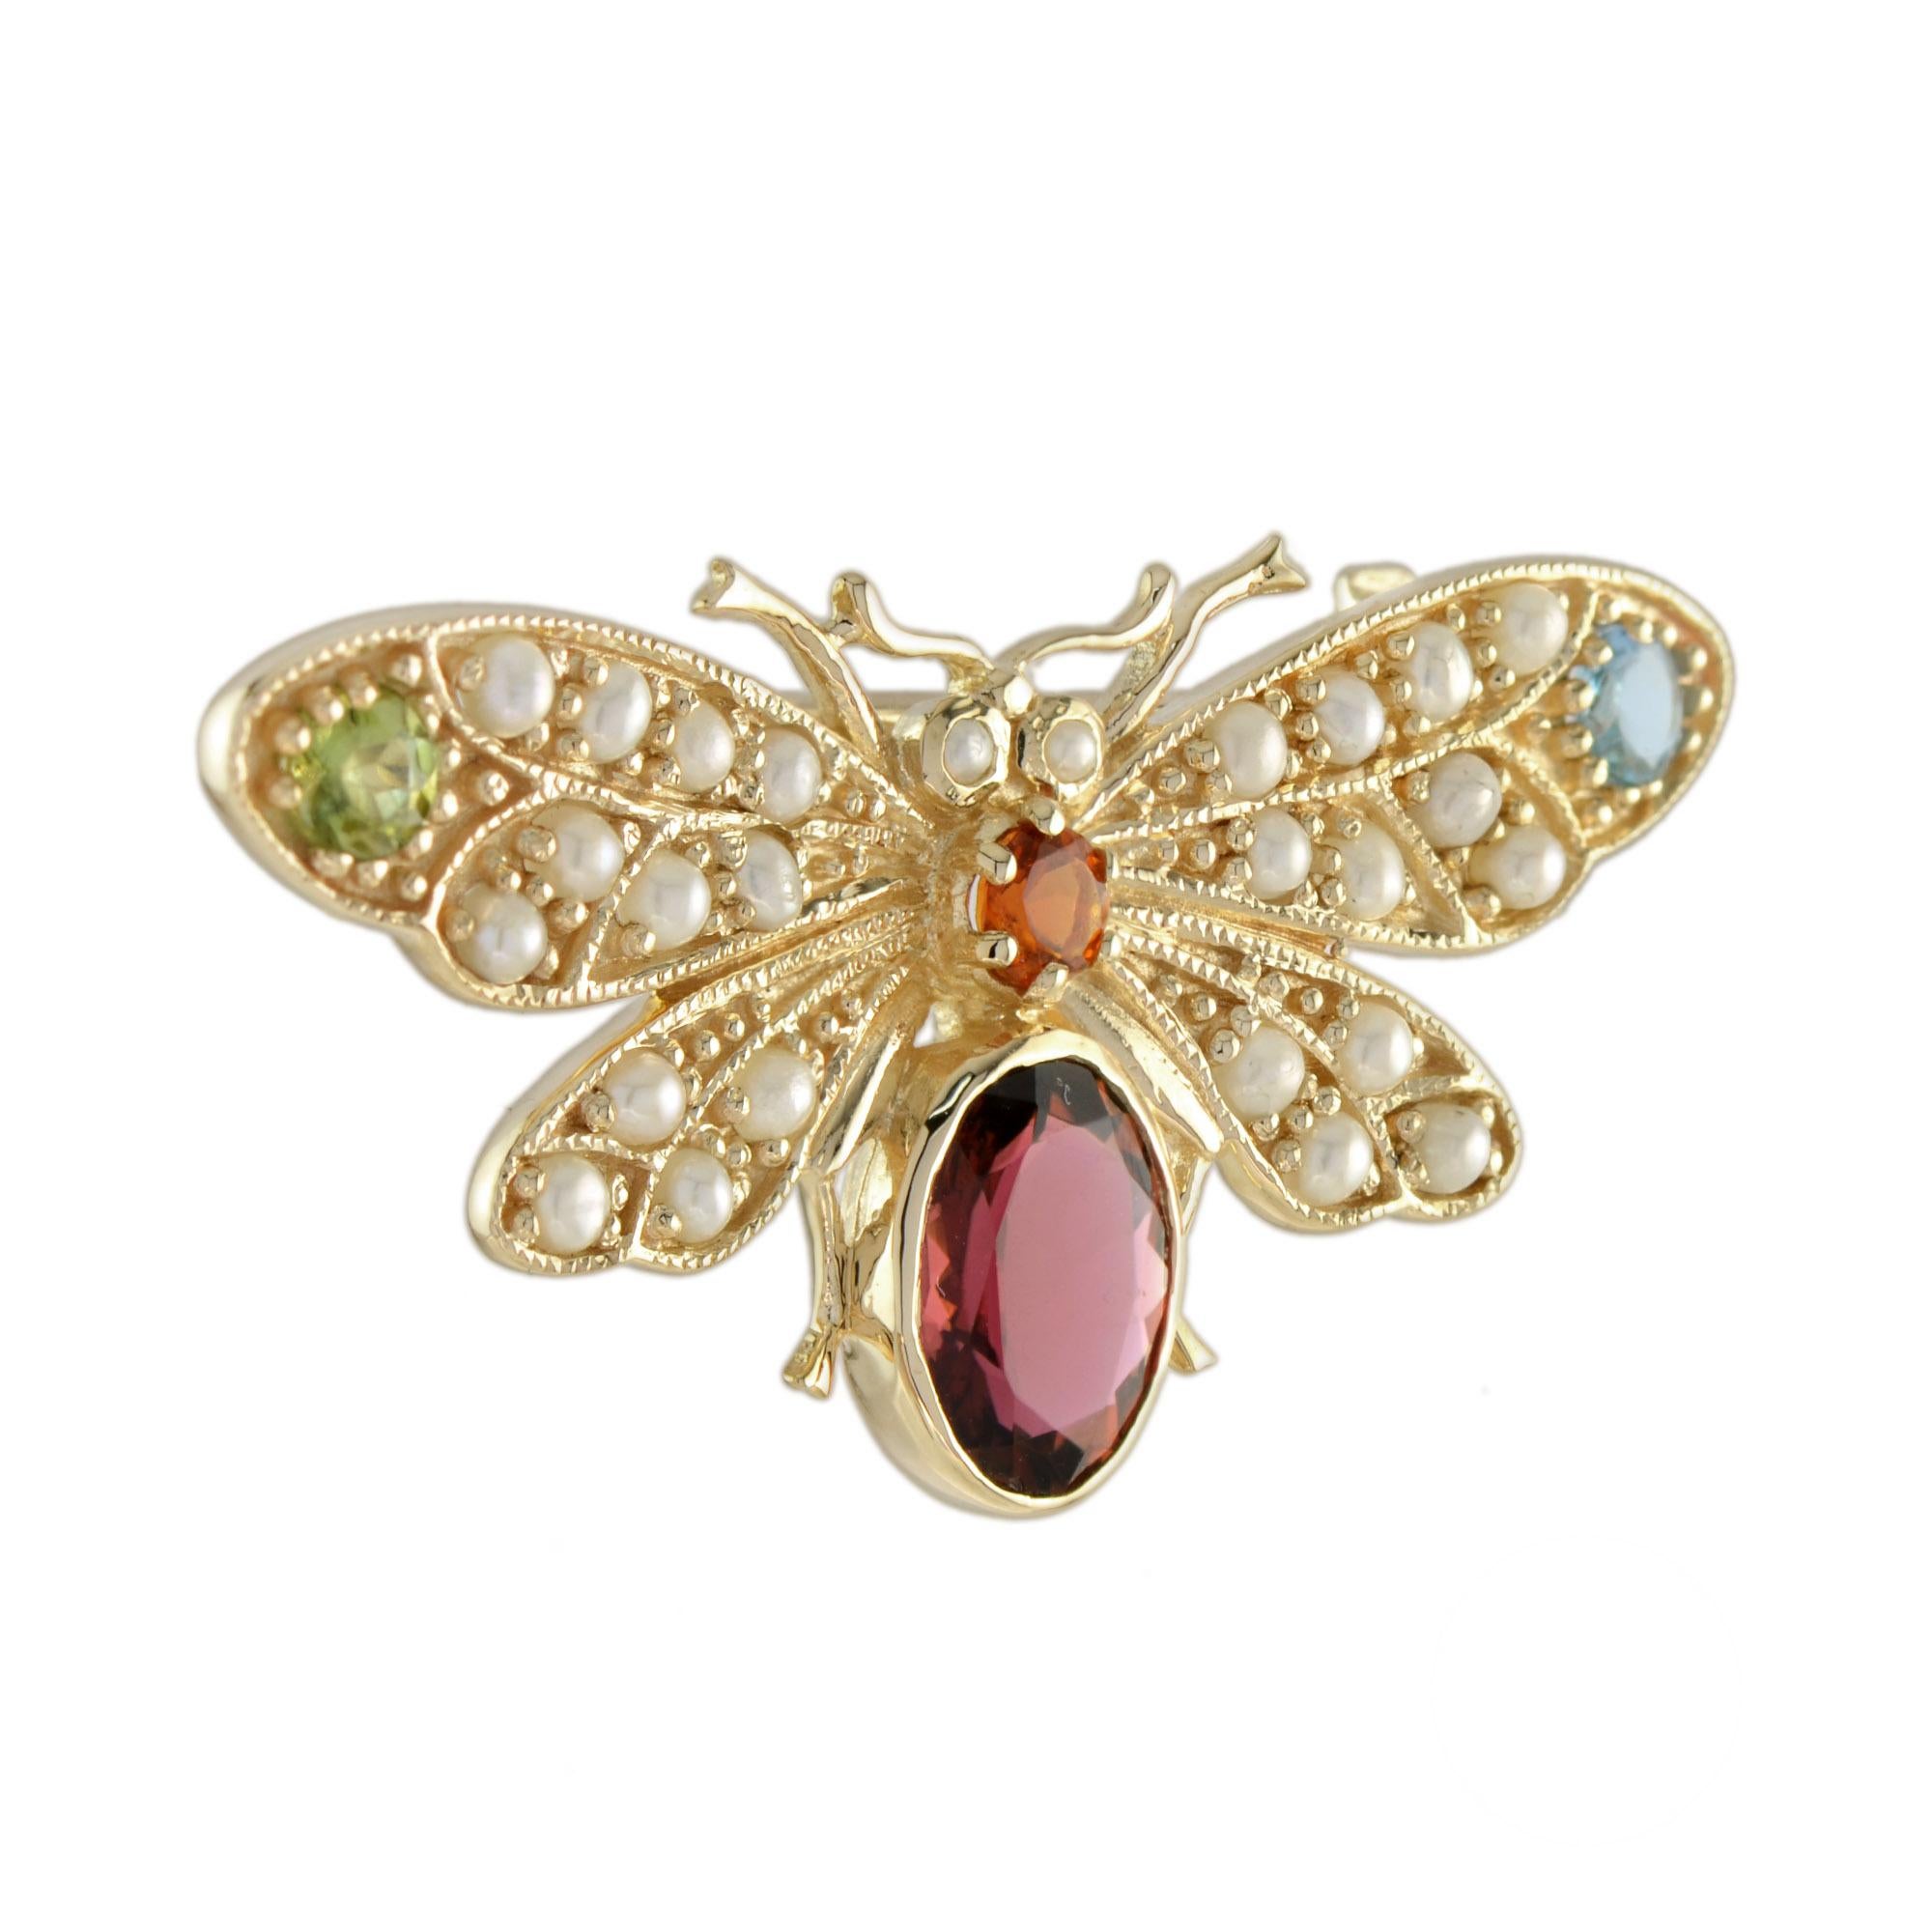 A stunning bee brooch was inspired by Victorian period insect broch. In abdomen is adorned with vivid pink tourmaline. The wings and middle body are decorated with green, red, and blue tourmaline.  The brooch can also be worn as a pendant. Bee is a